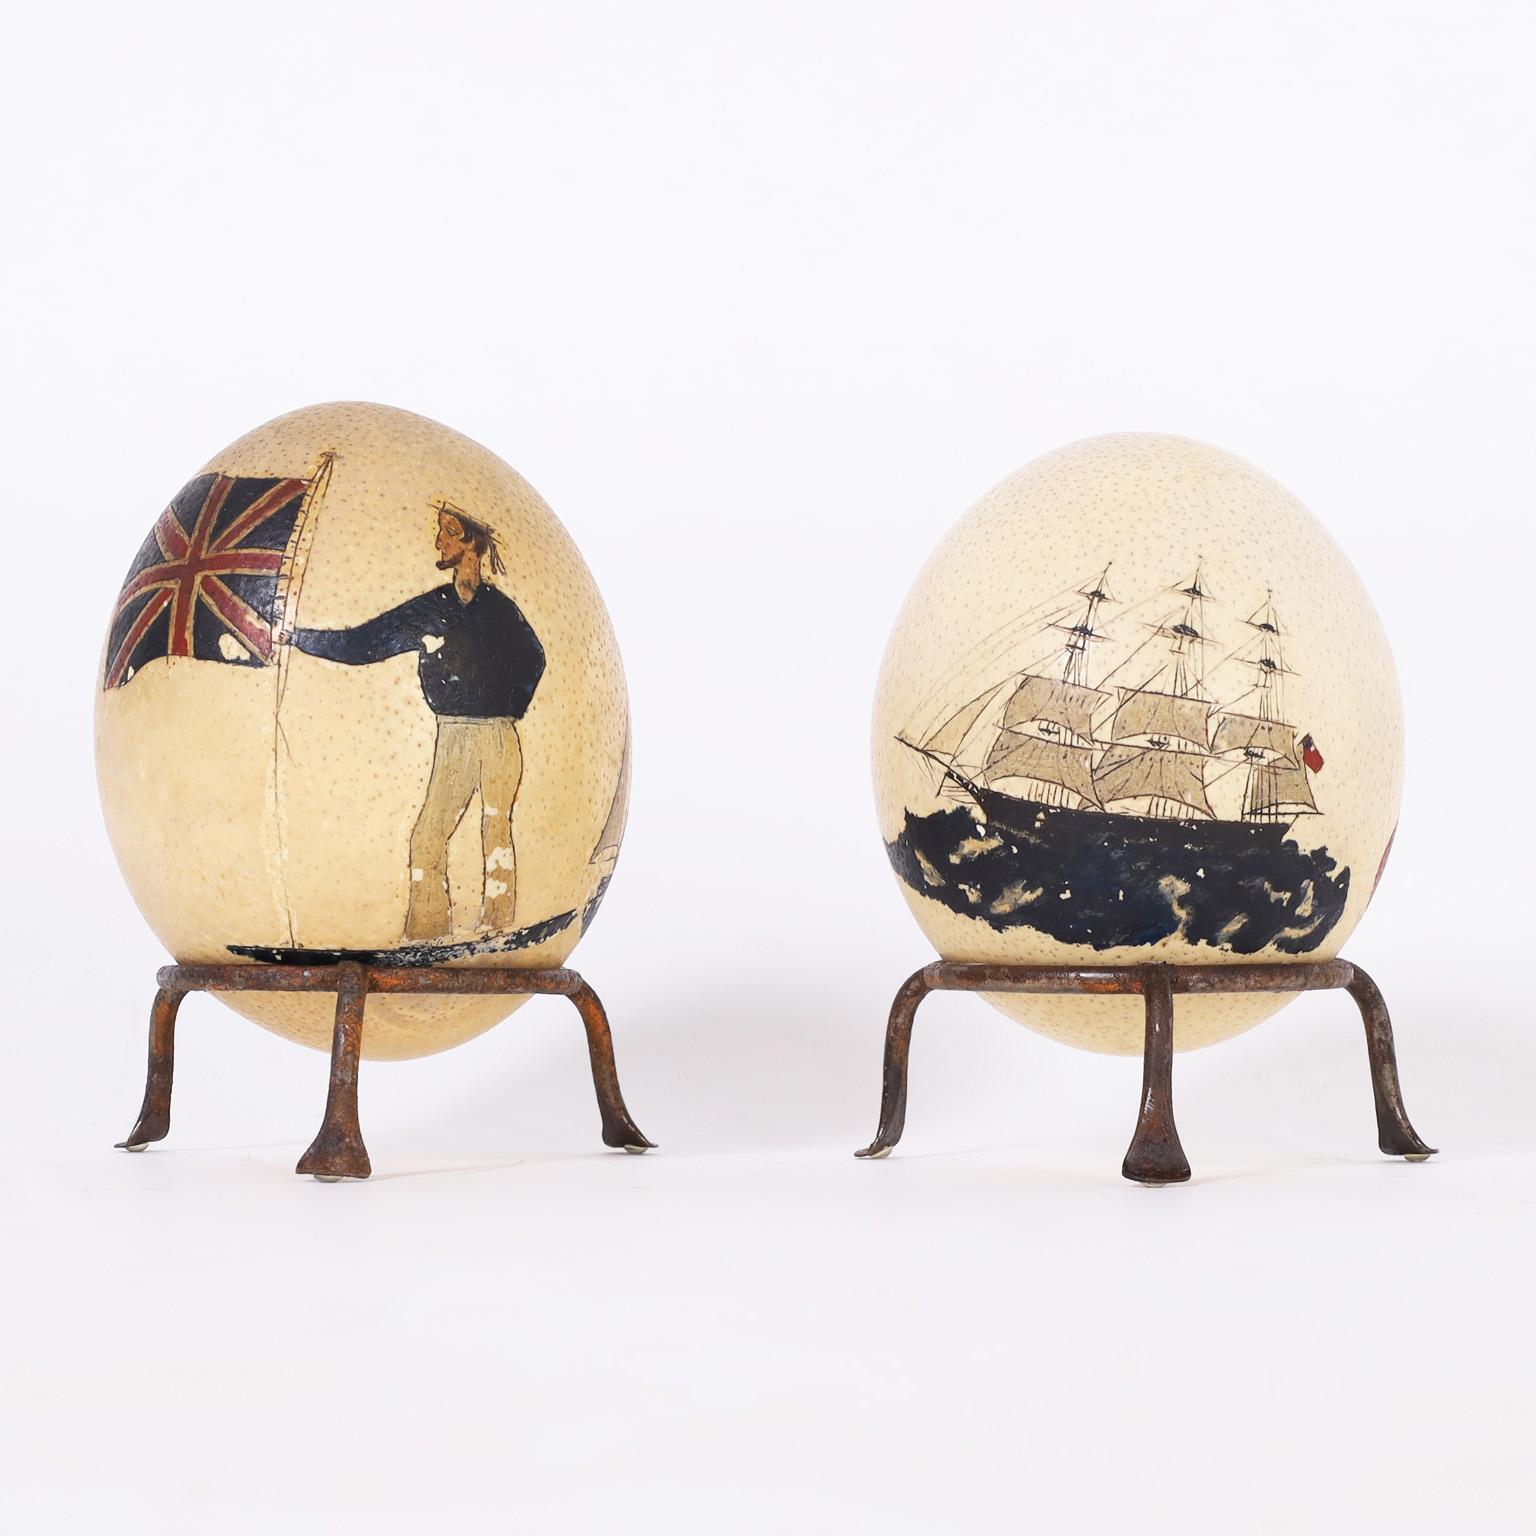 Rare and historically significant English pair of ostrich eggs etched and paint decorated with patriotic emblems commemorating the the 1st Boer war. Priced Individually.
 